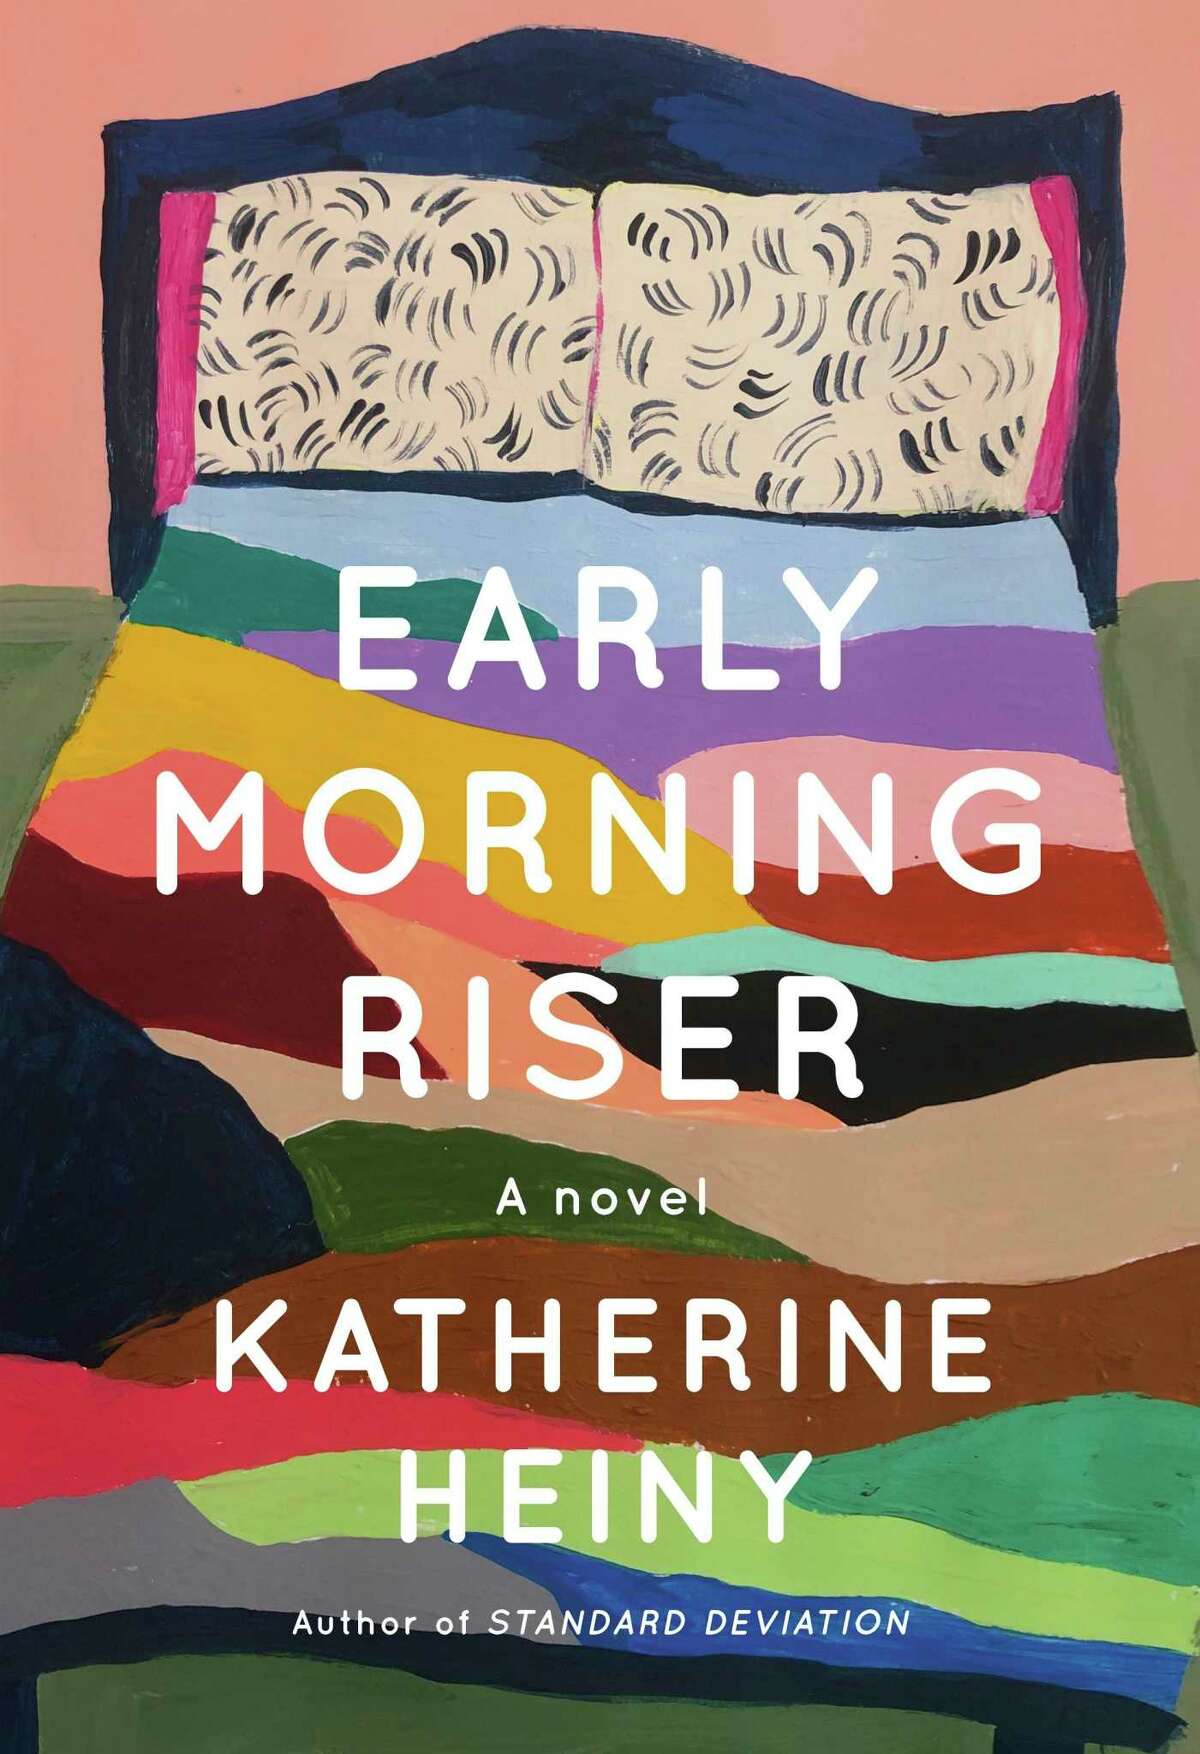 Katherine Heiny's newest book, "Early Morning Riser" is scheduled to be released April 13. The fictional story draws from aspects of the author's experiences living in Midland and Boyne City, Michigan. (Photo provided)